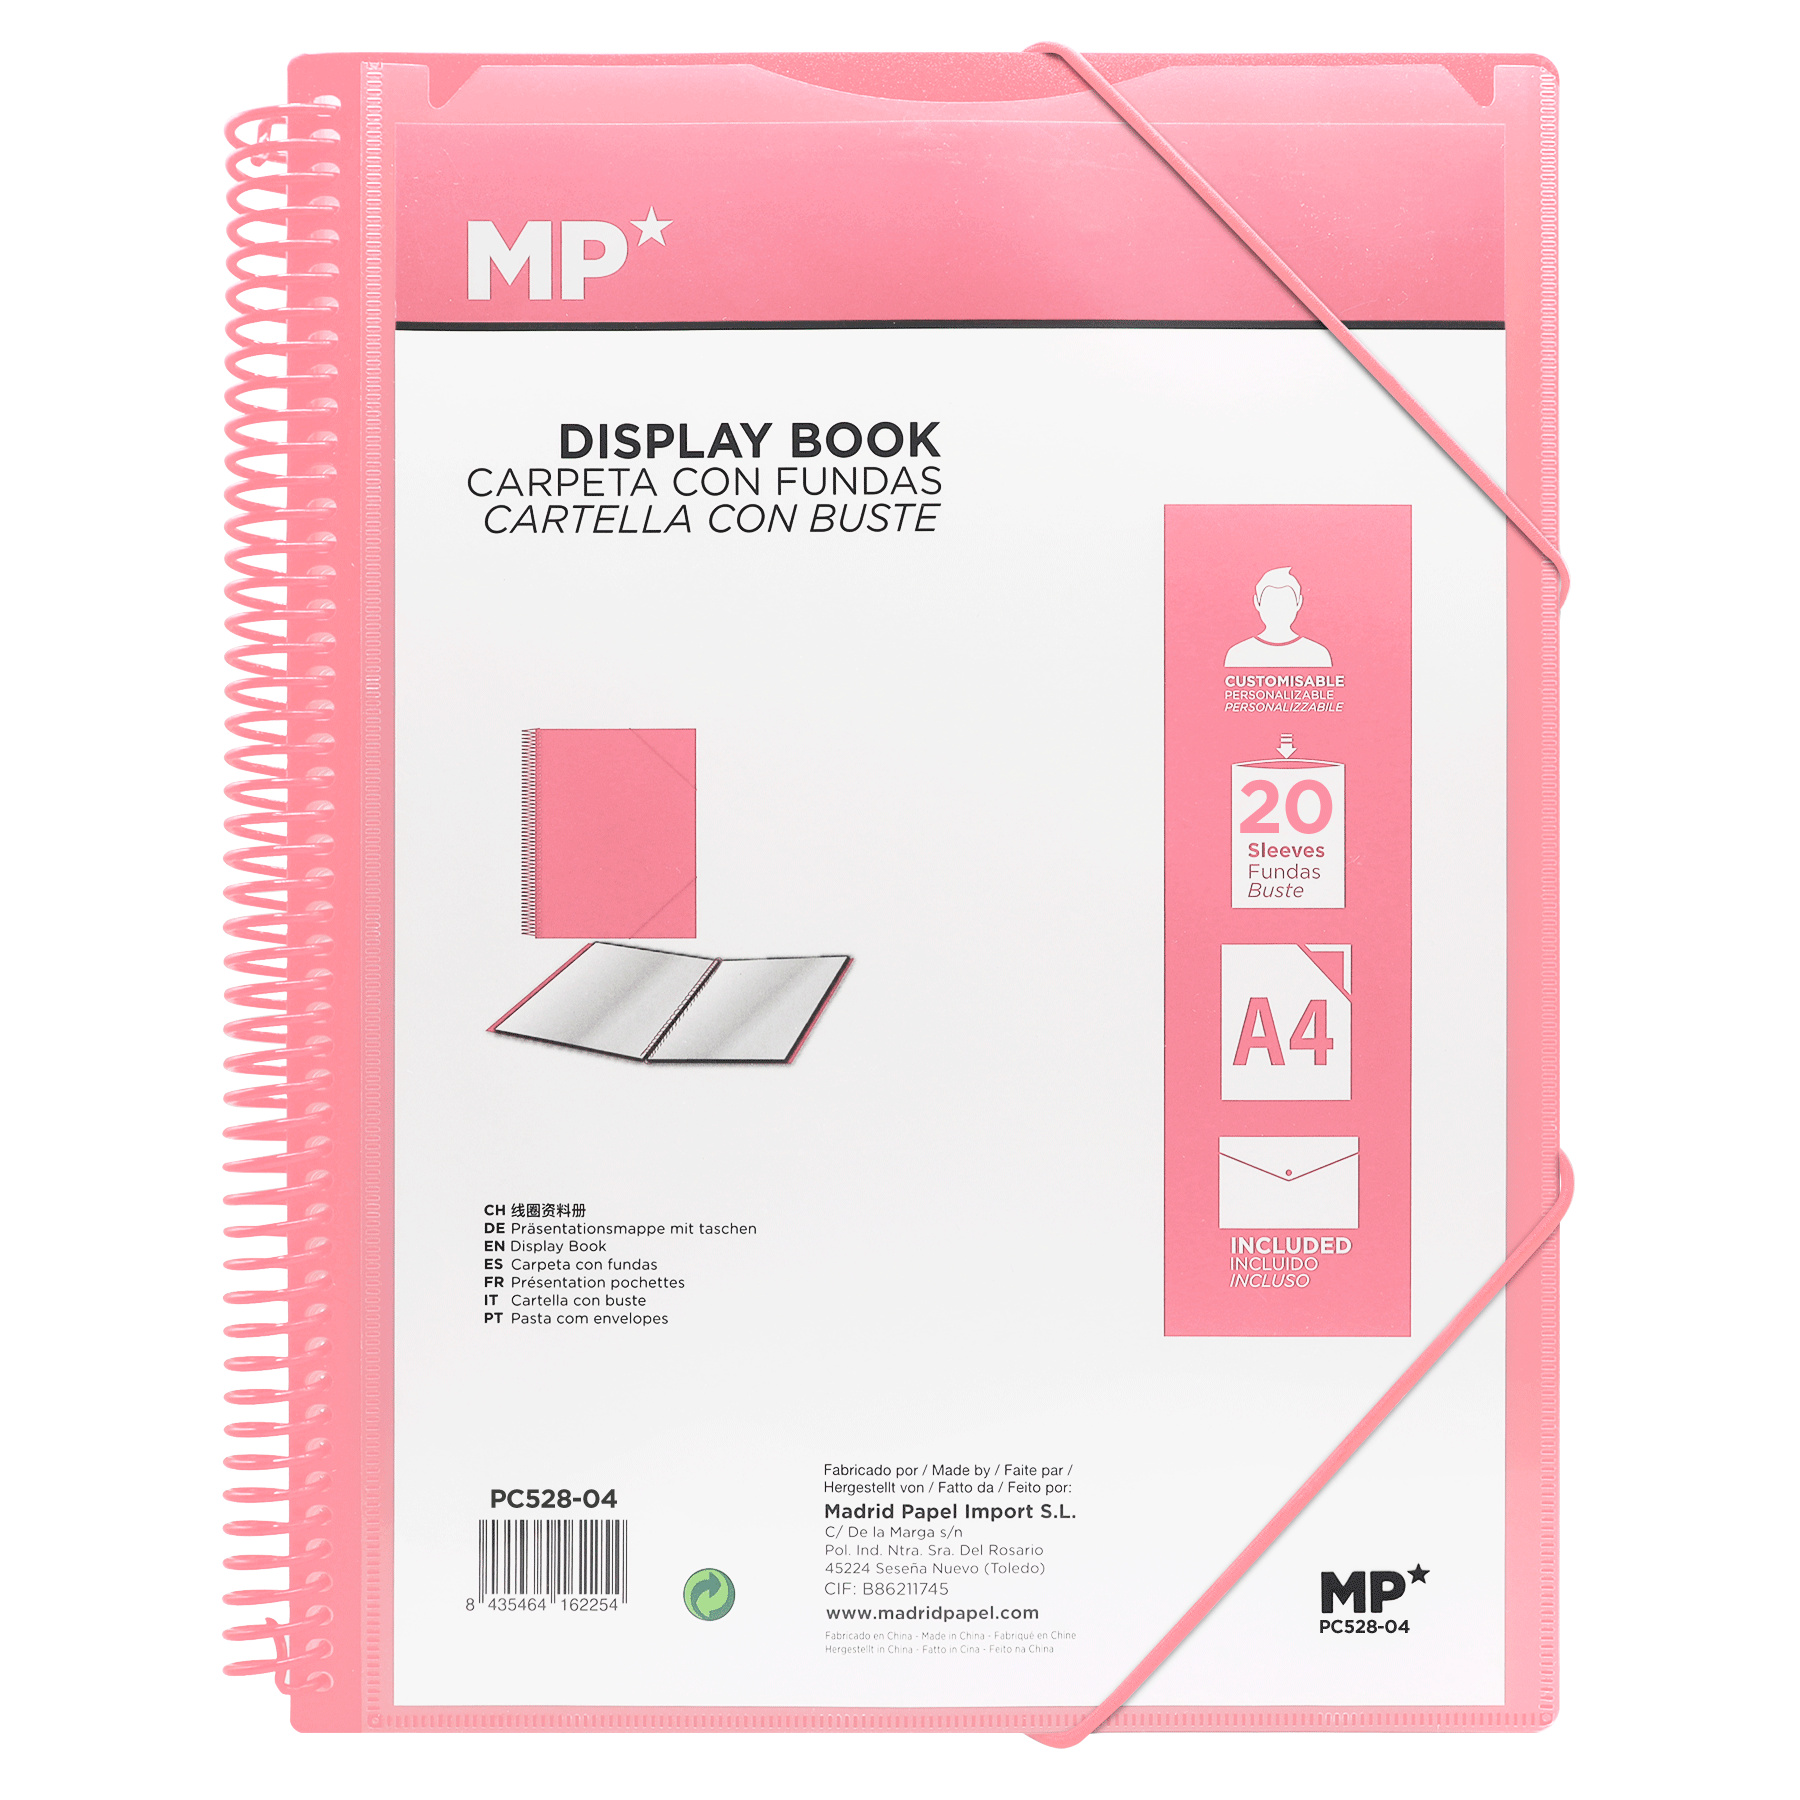 PC528-04 POLYPROPYLENE DISPLAY BOOK FOLDER WITH SPIRAL AND ELASTIC BANDS